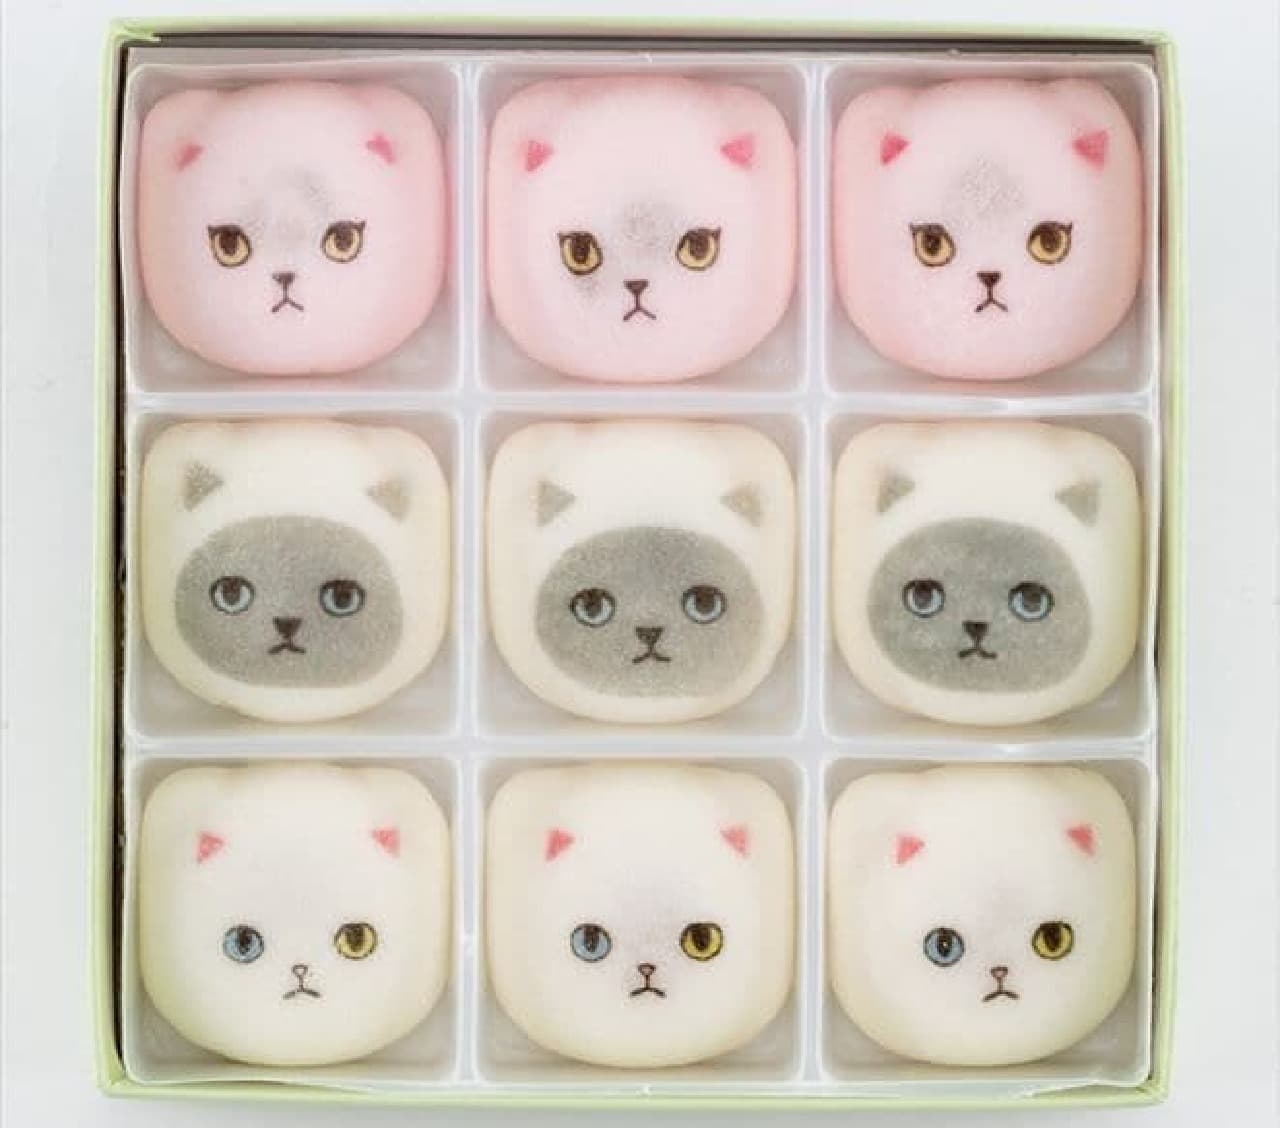 "[Cat Confectionery] Hozui" is Hozui with a cute cat's face printed on it.